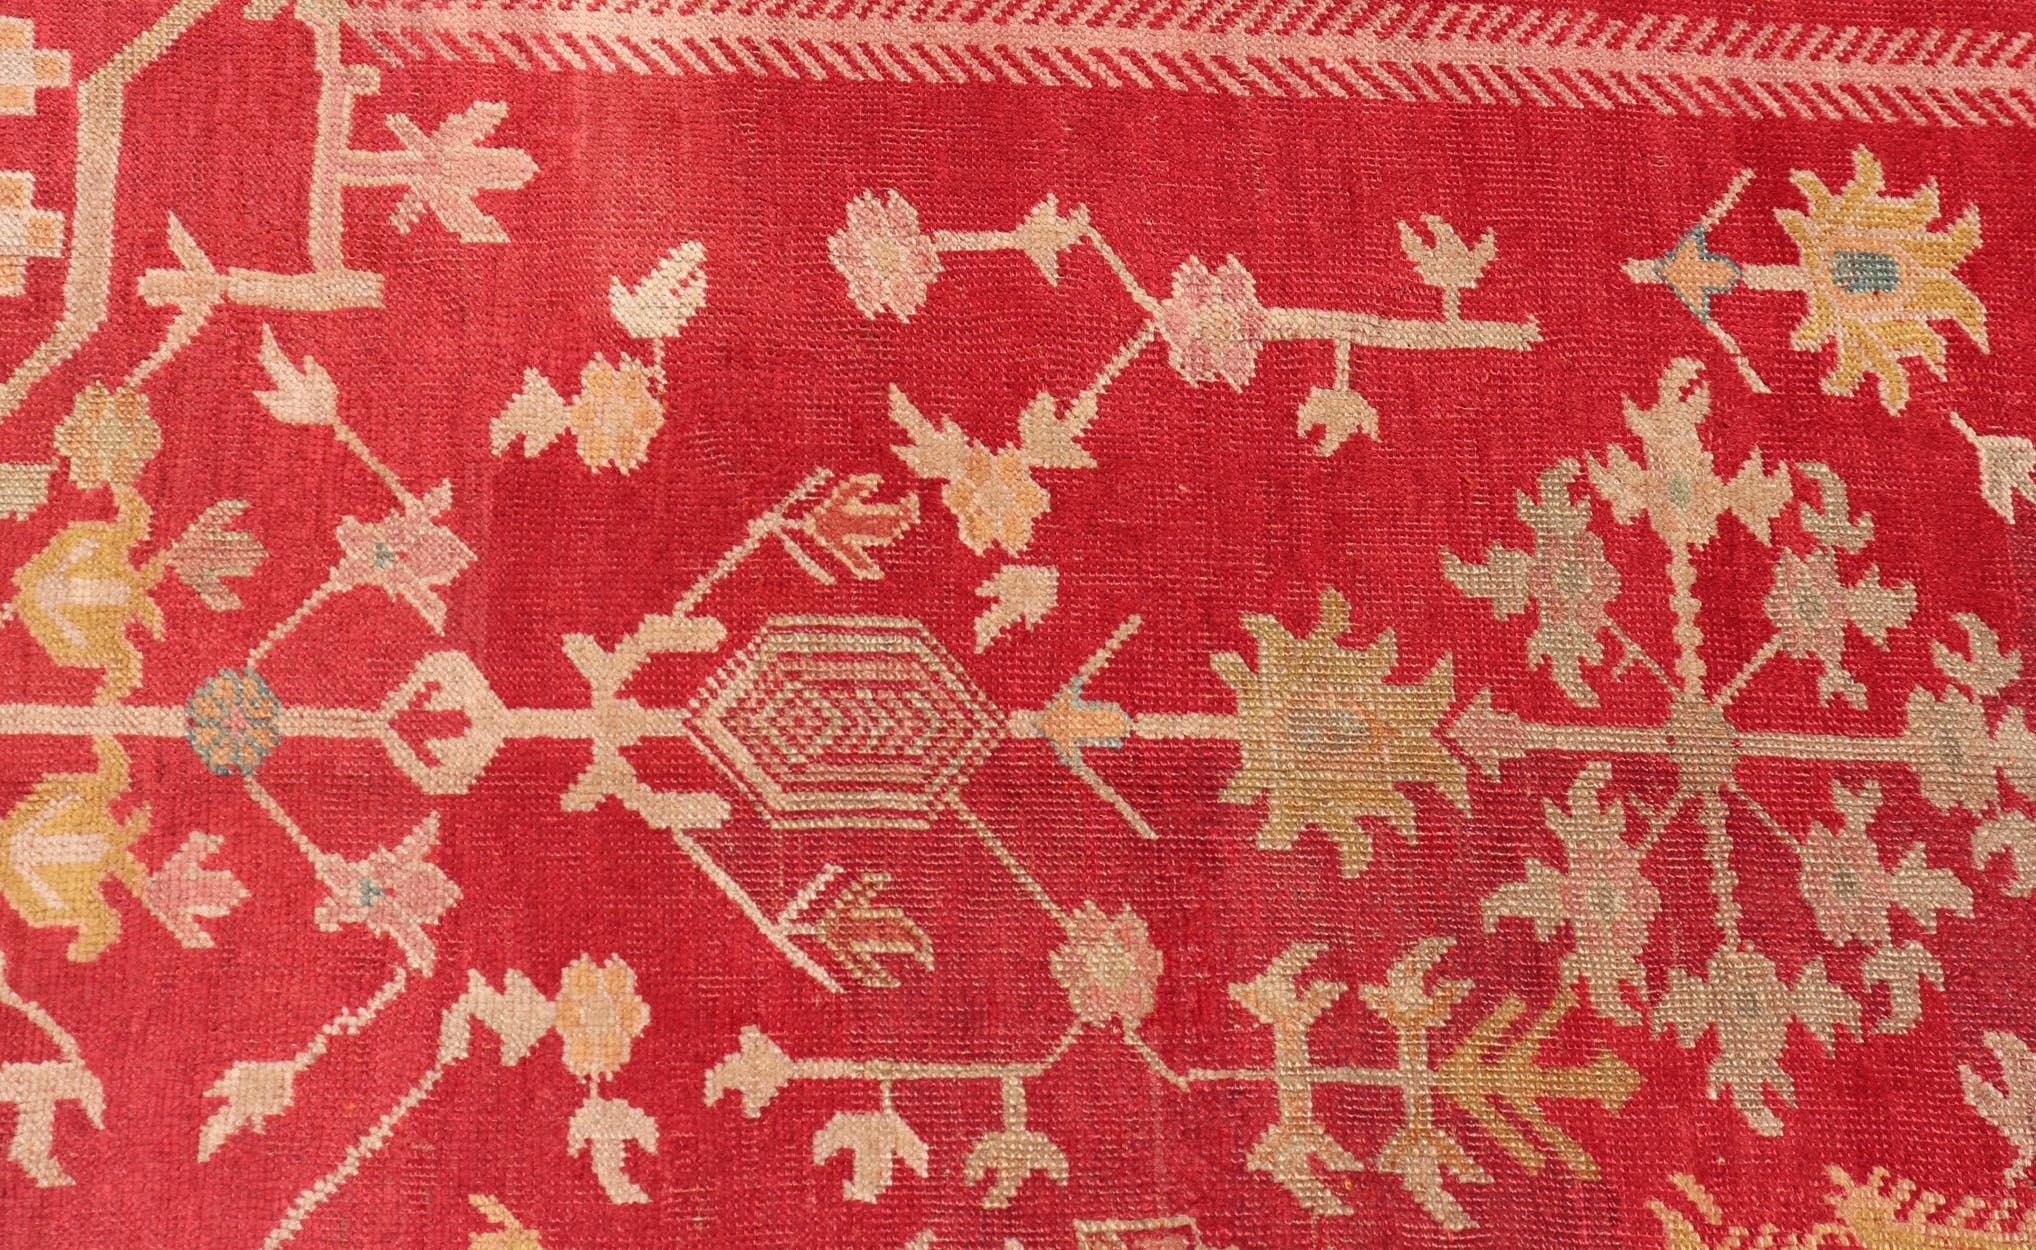 Antique Turkish Oushak Rug in Royal Red and Saffron Gold with Geometric Design In Good Condition For Sale In Atlanta, GA